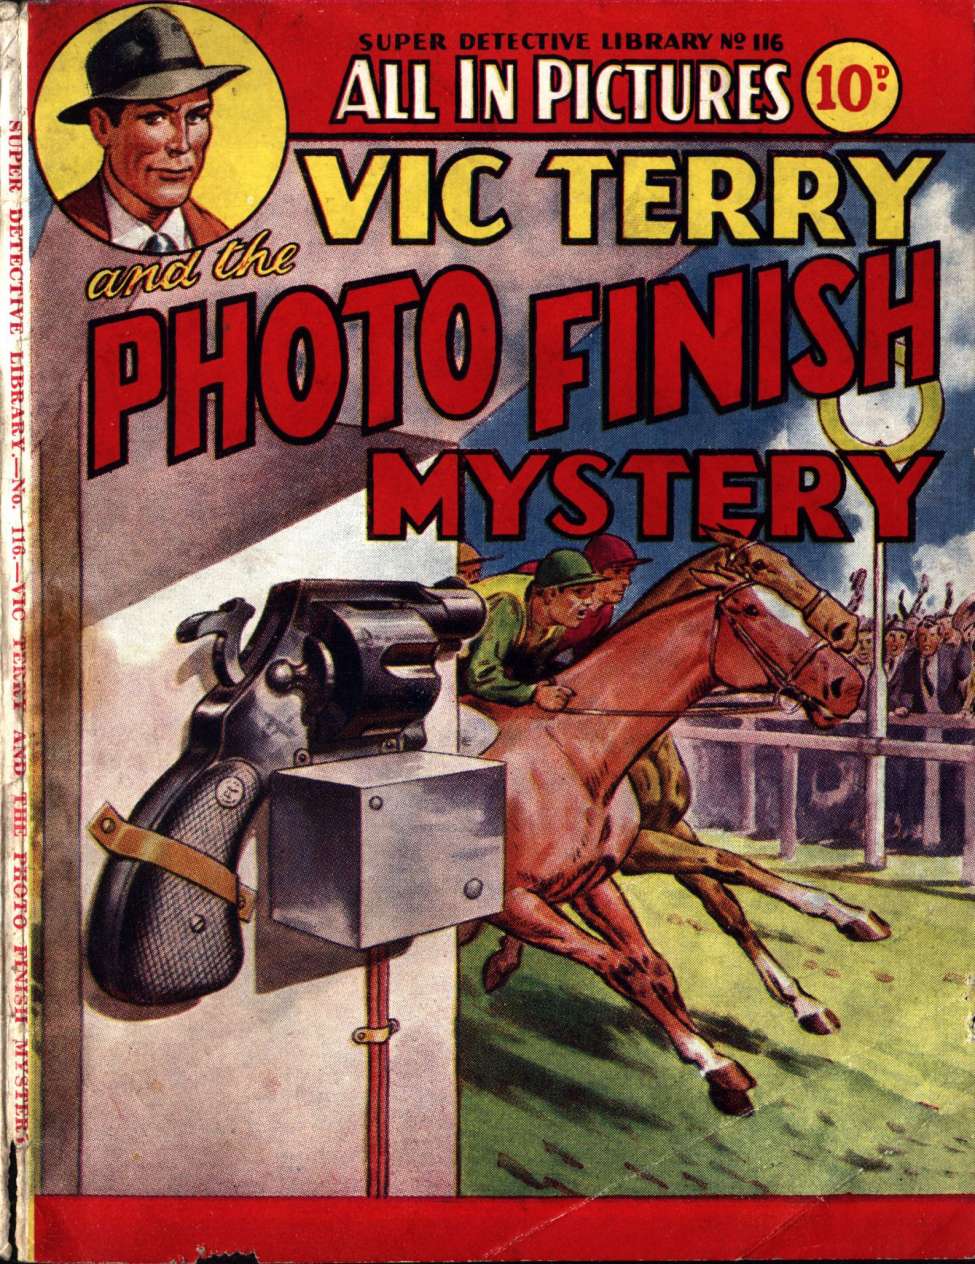 Comic Book Cover For Super Detective Library 116 - The Photo Finish Mystery